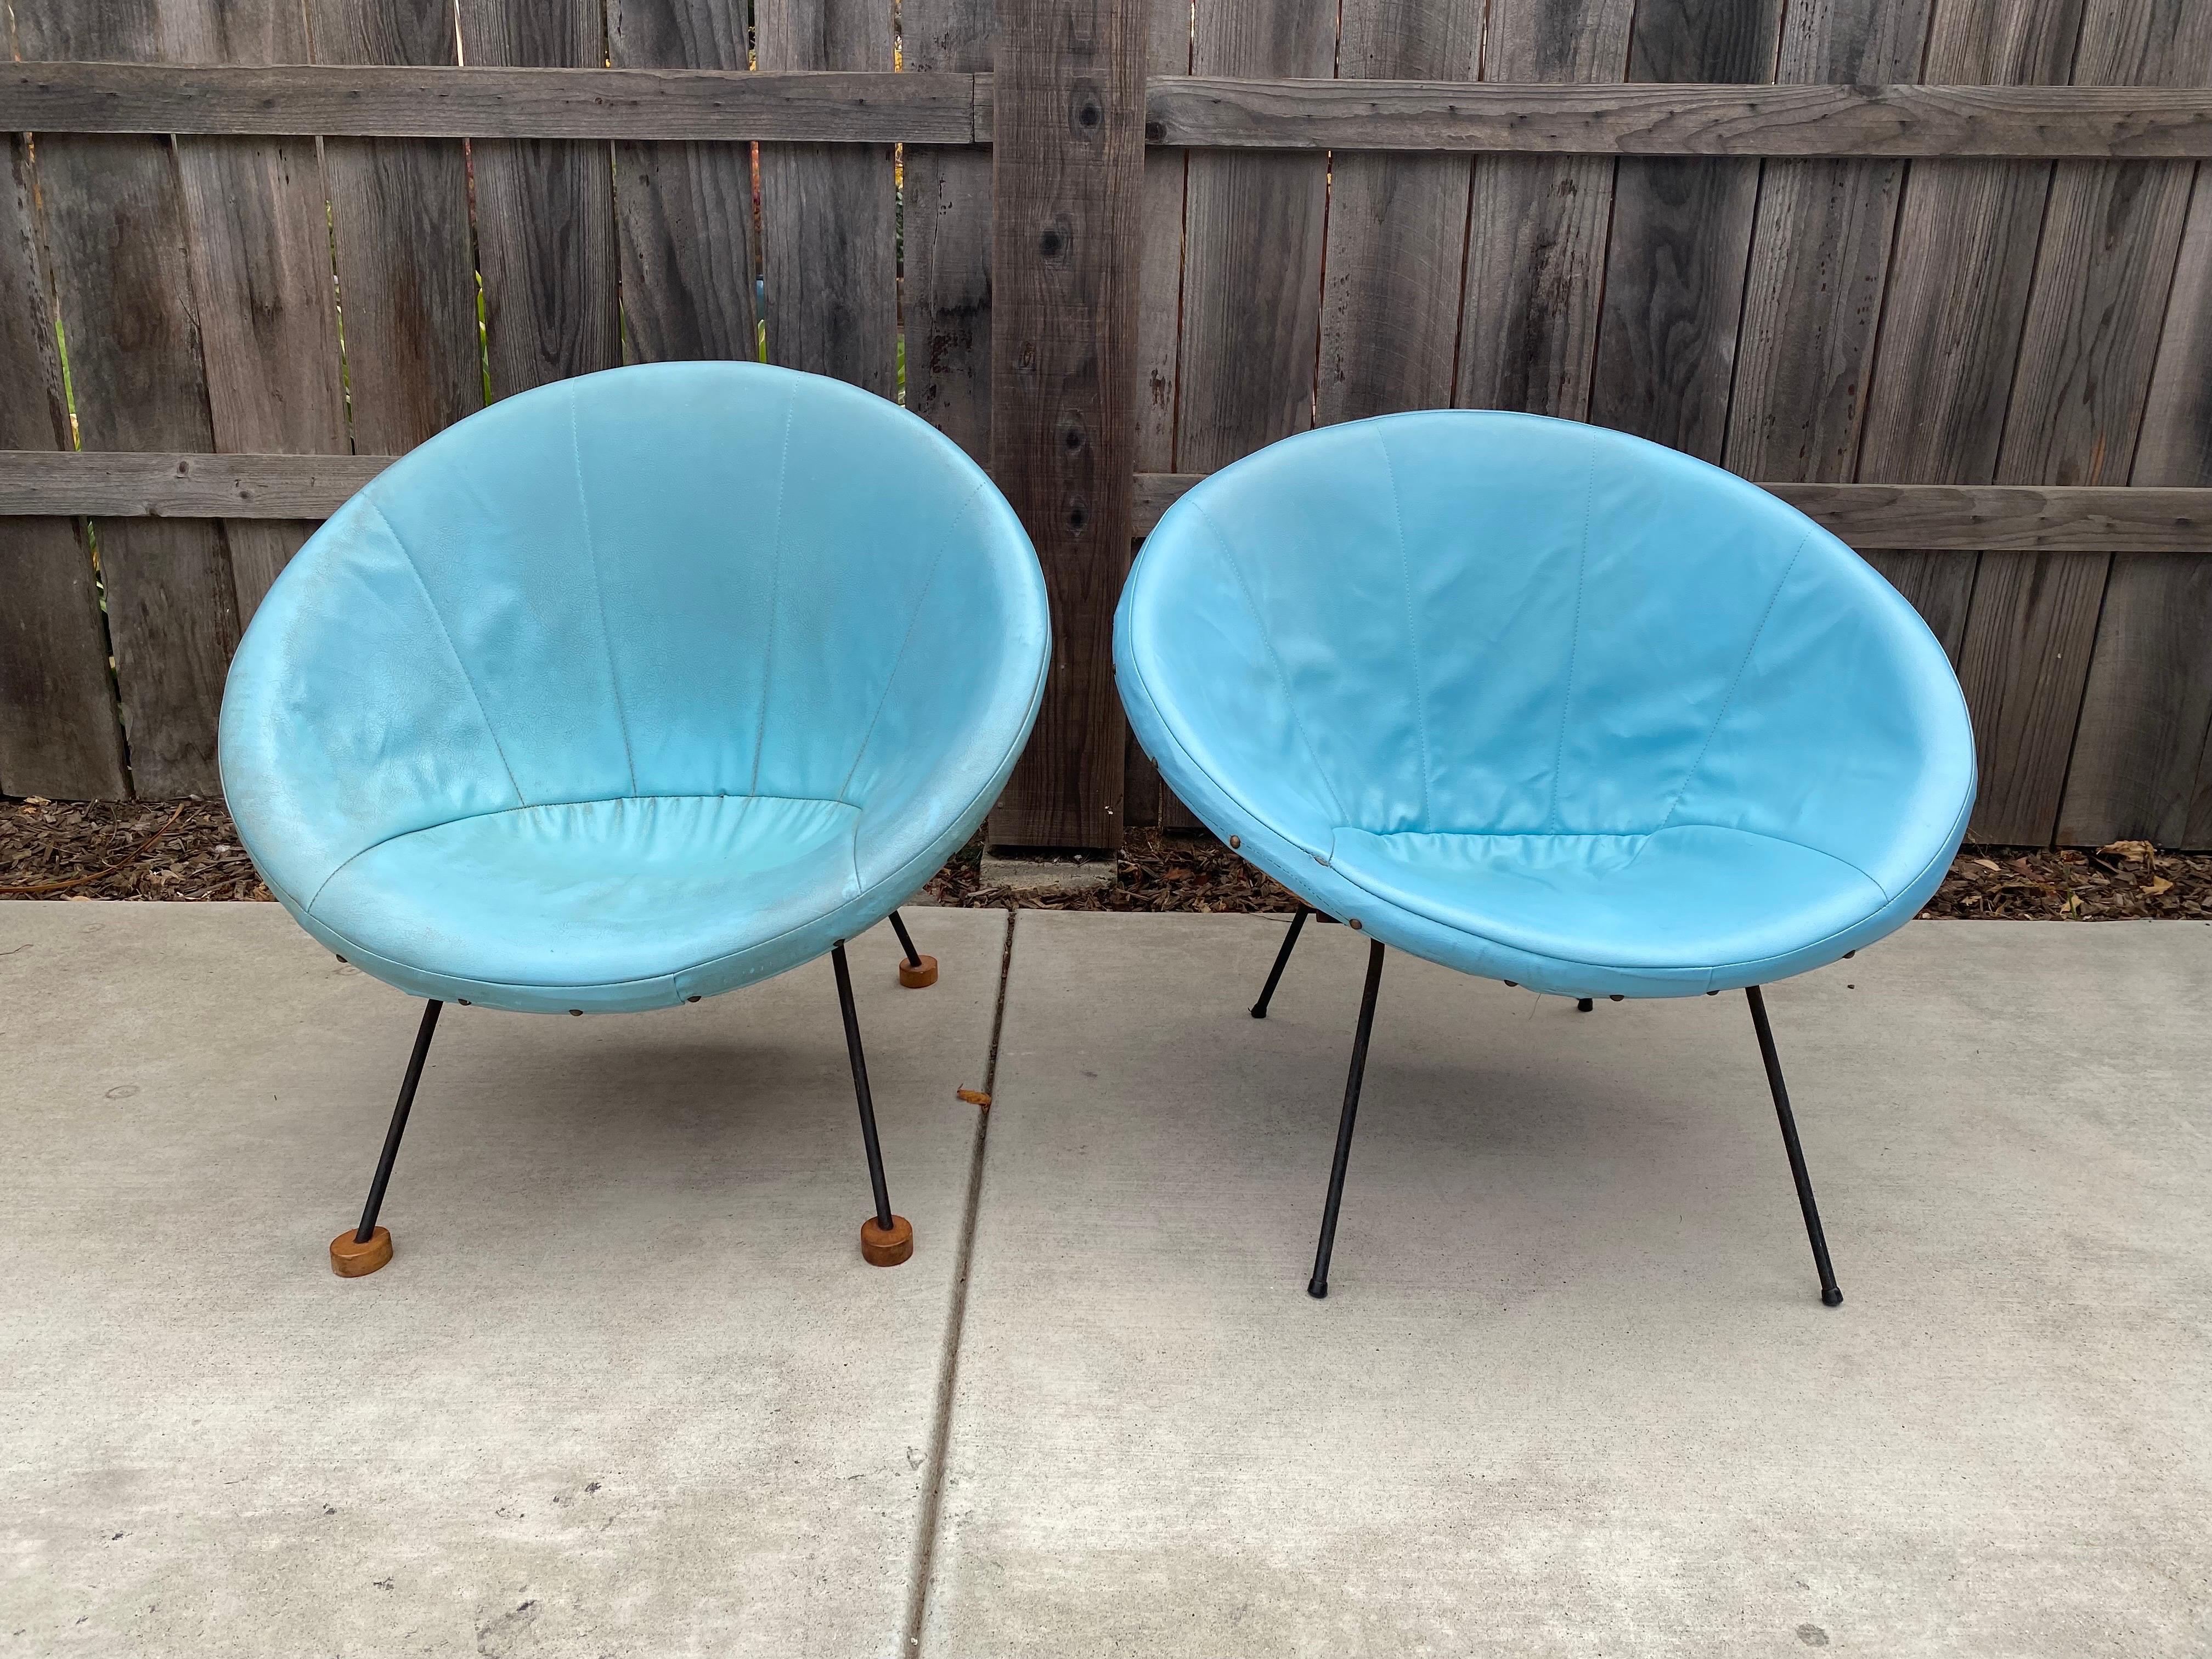 For sale we have a stunning pair of midcentury rattan club chairs, scoop chairs or side chairs, both with their original turquoise faux leather or vinyl seat covers. Both chairs sit on a cast iron frame with one chair having wooden feet. A stunning